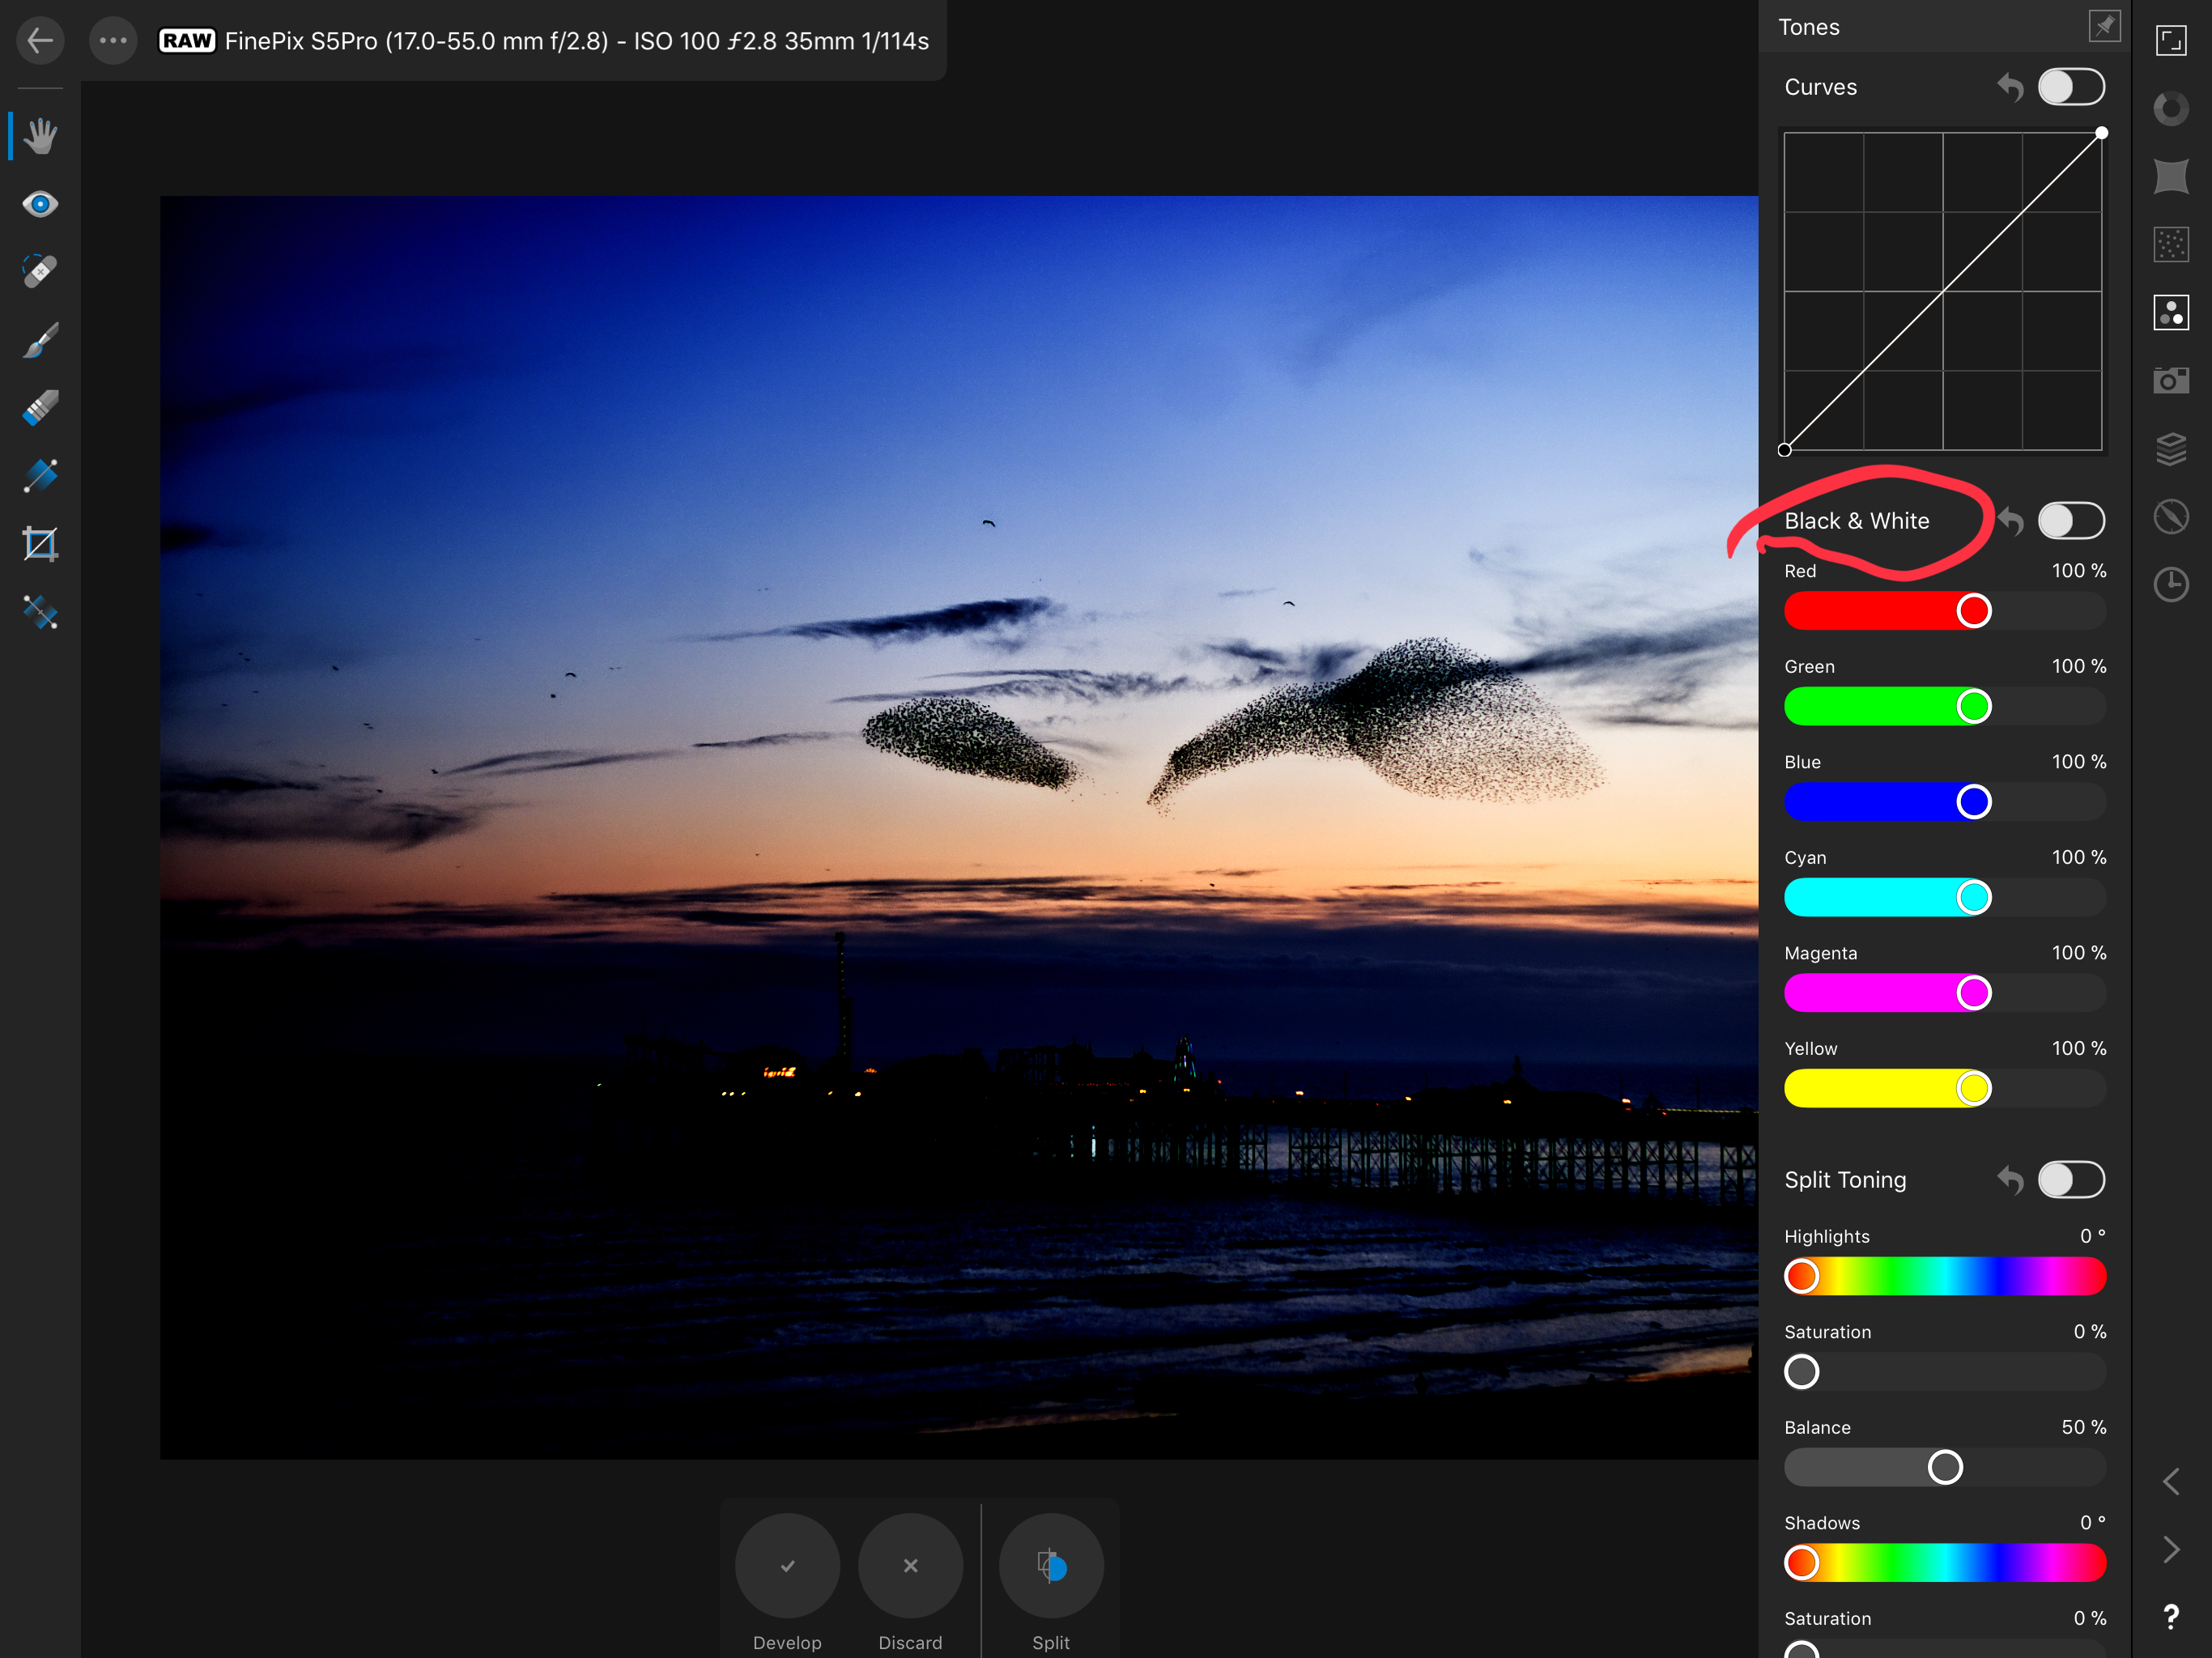 affinity photo 2 ipad review